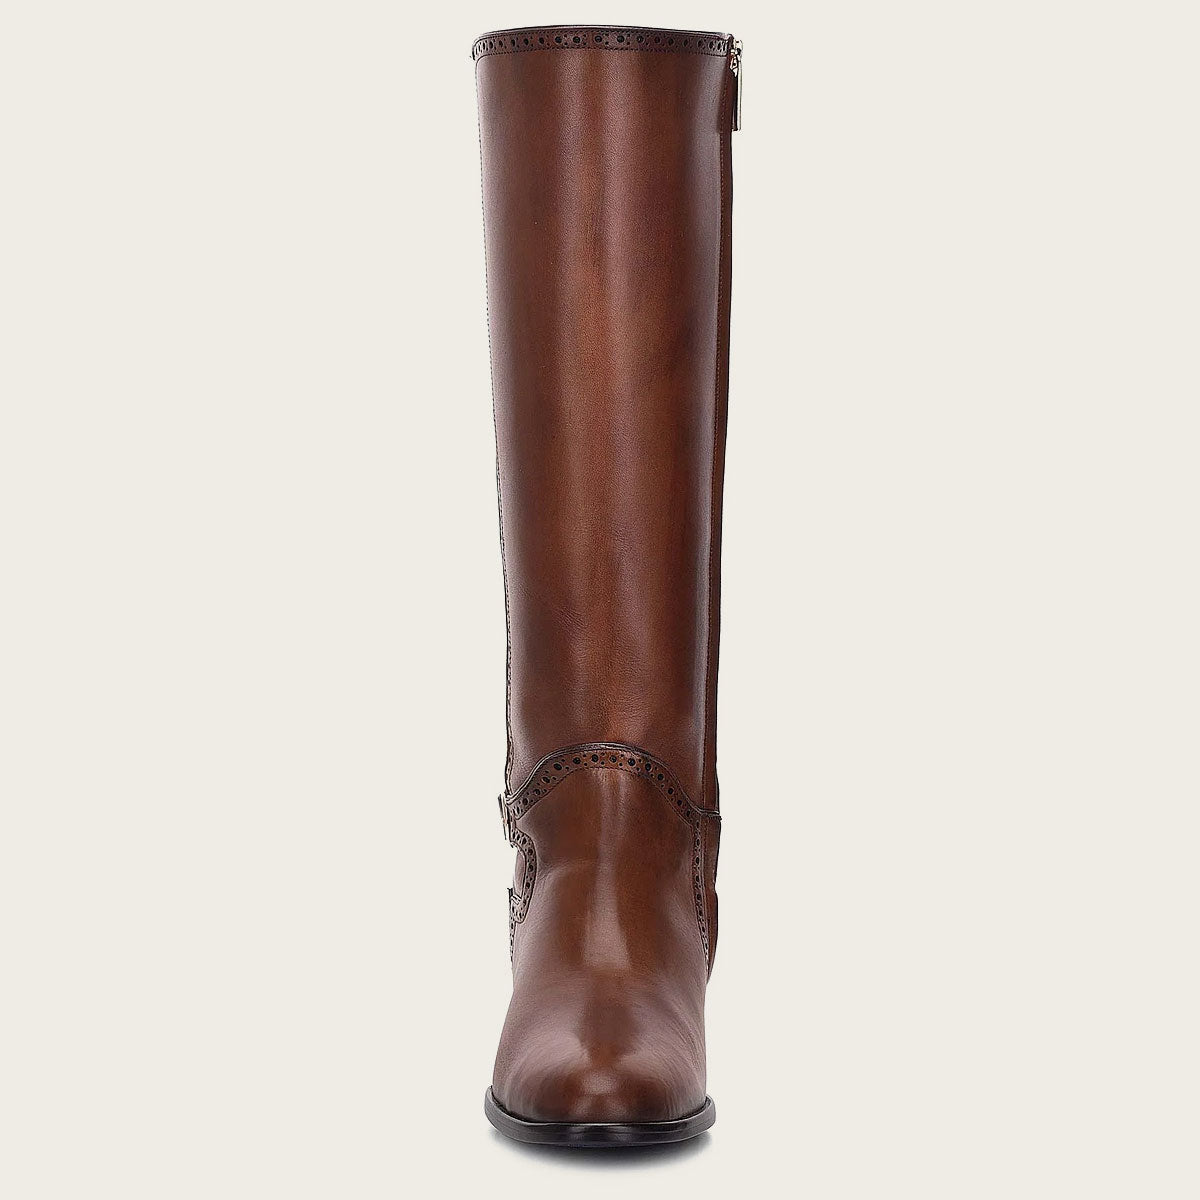 A beautiful honey-colored leather riding boot, hand-painted with intricate details, perfect for the fashion-forward equestrian.